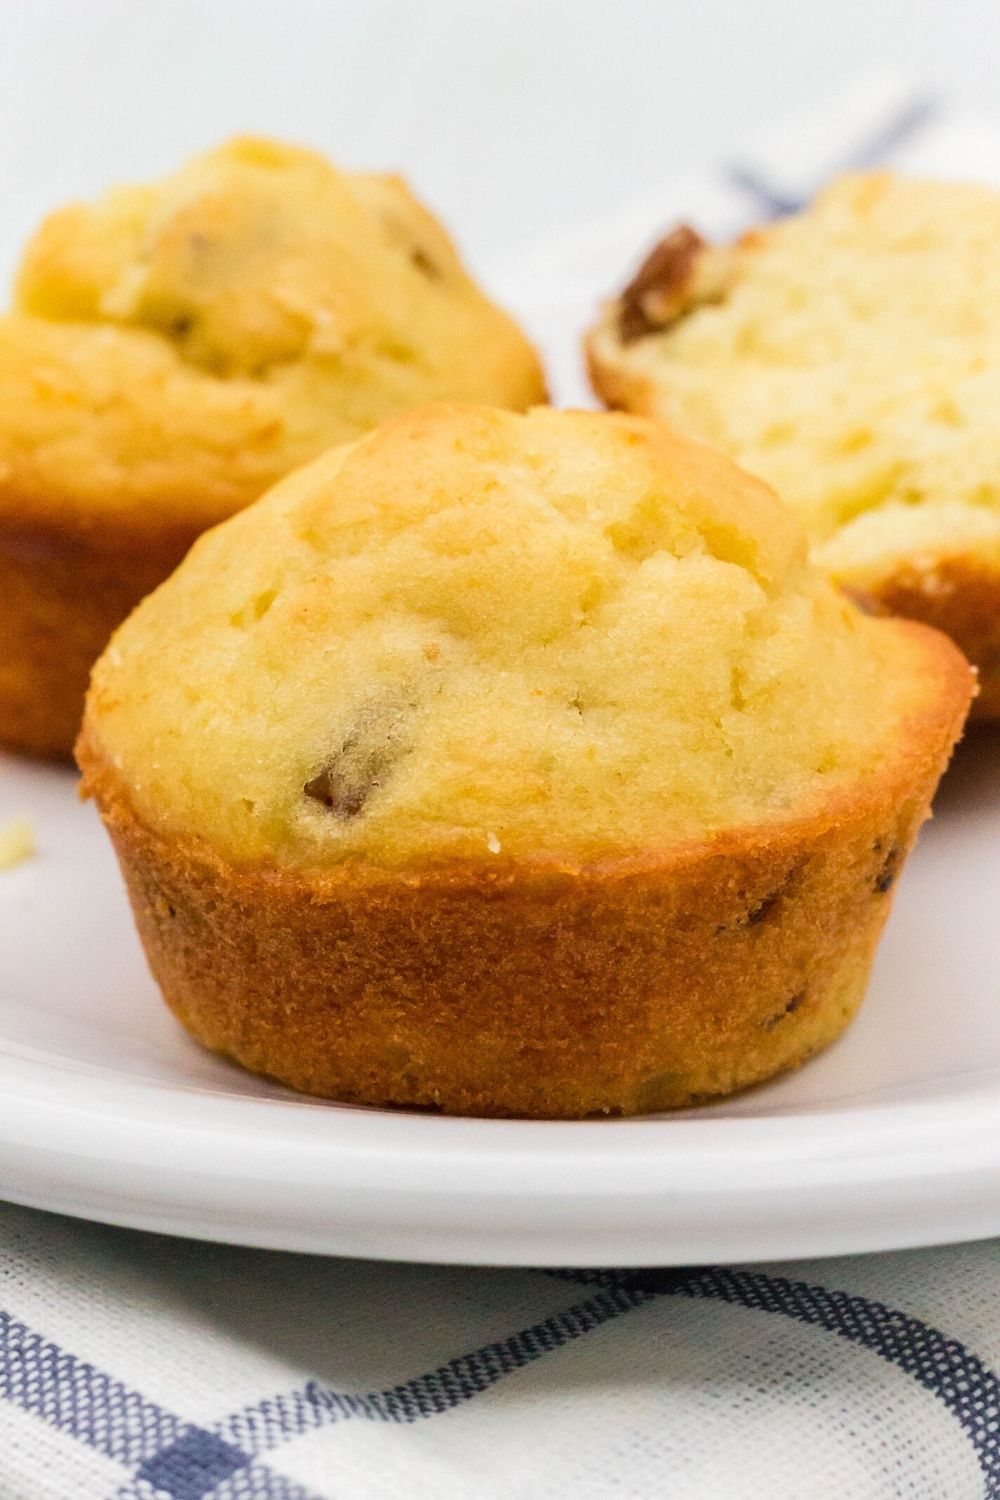 three whole German-style muffins on a plate, with one muffin close-up in the center of the photo.